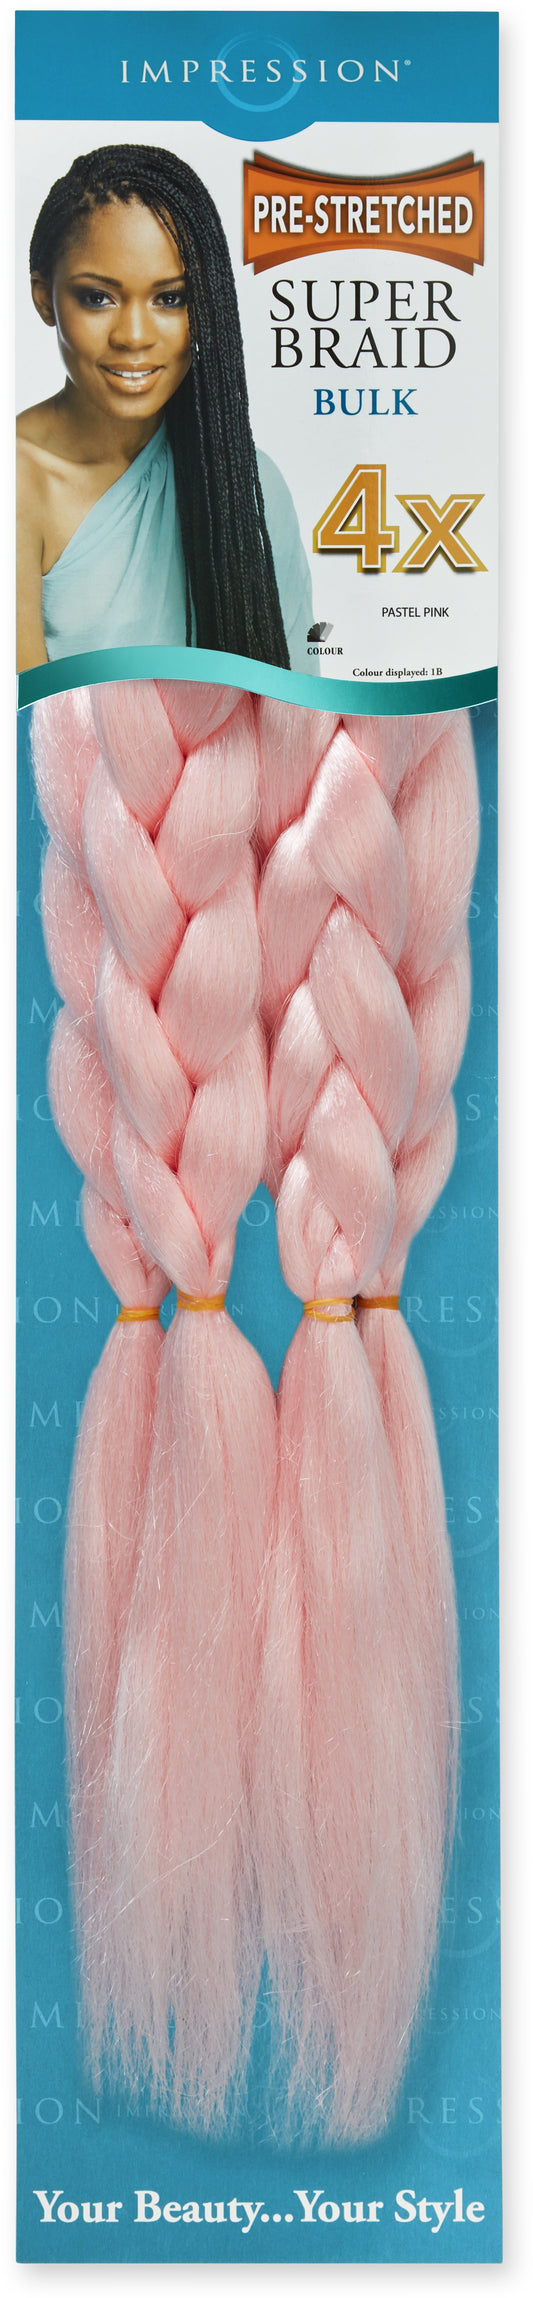 (HAIR BRAID) Impression Pre-Streched SB 4IN1 Colour Pastel Pink.